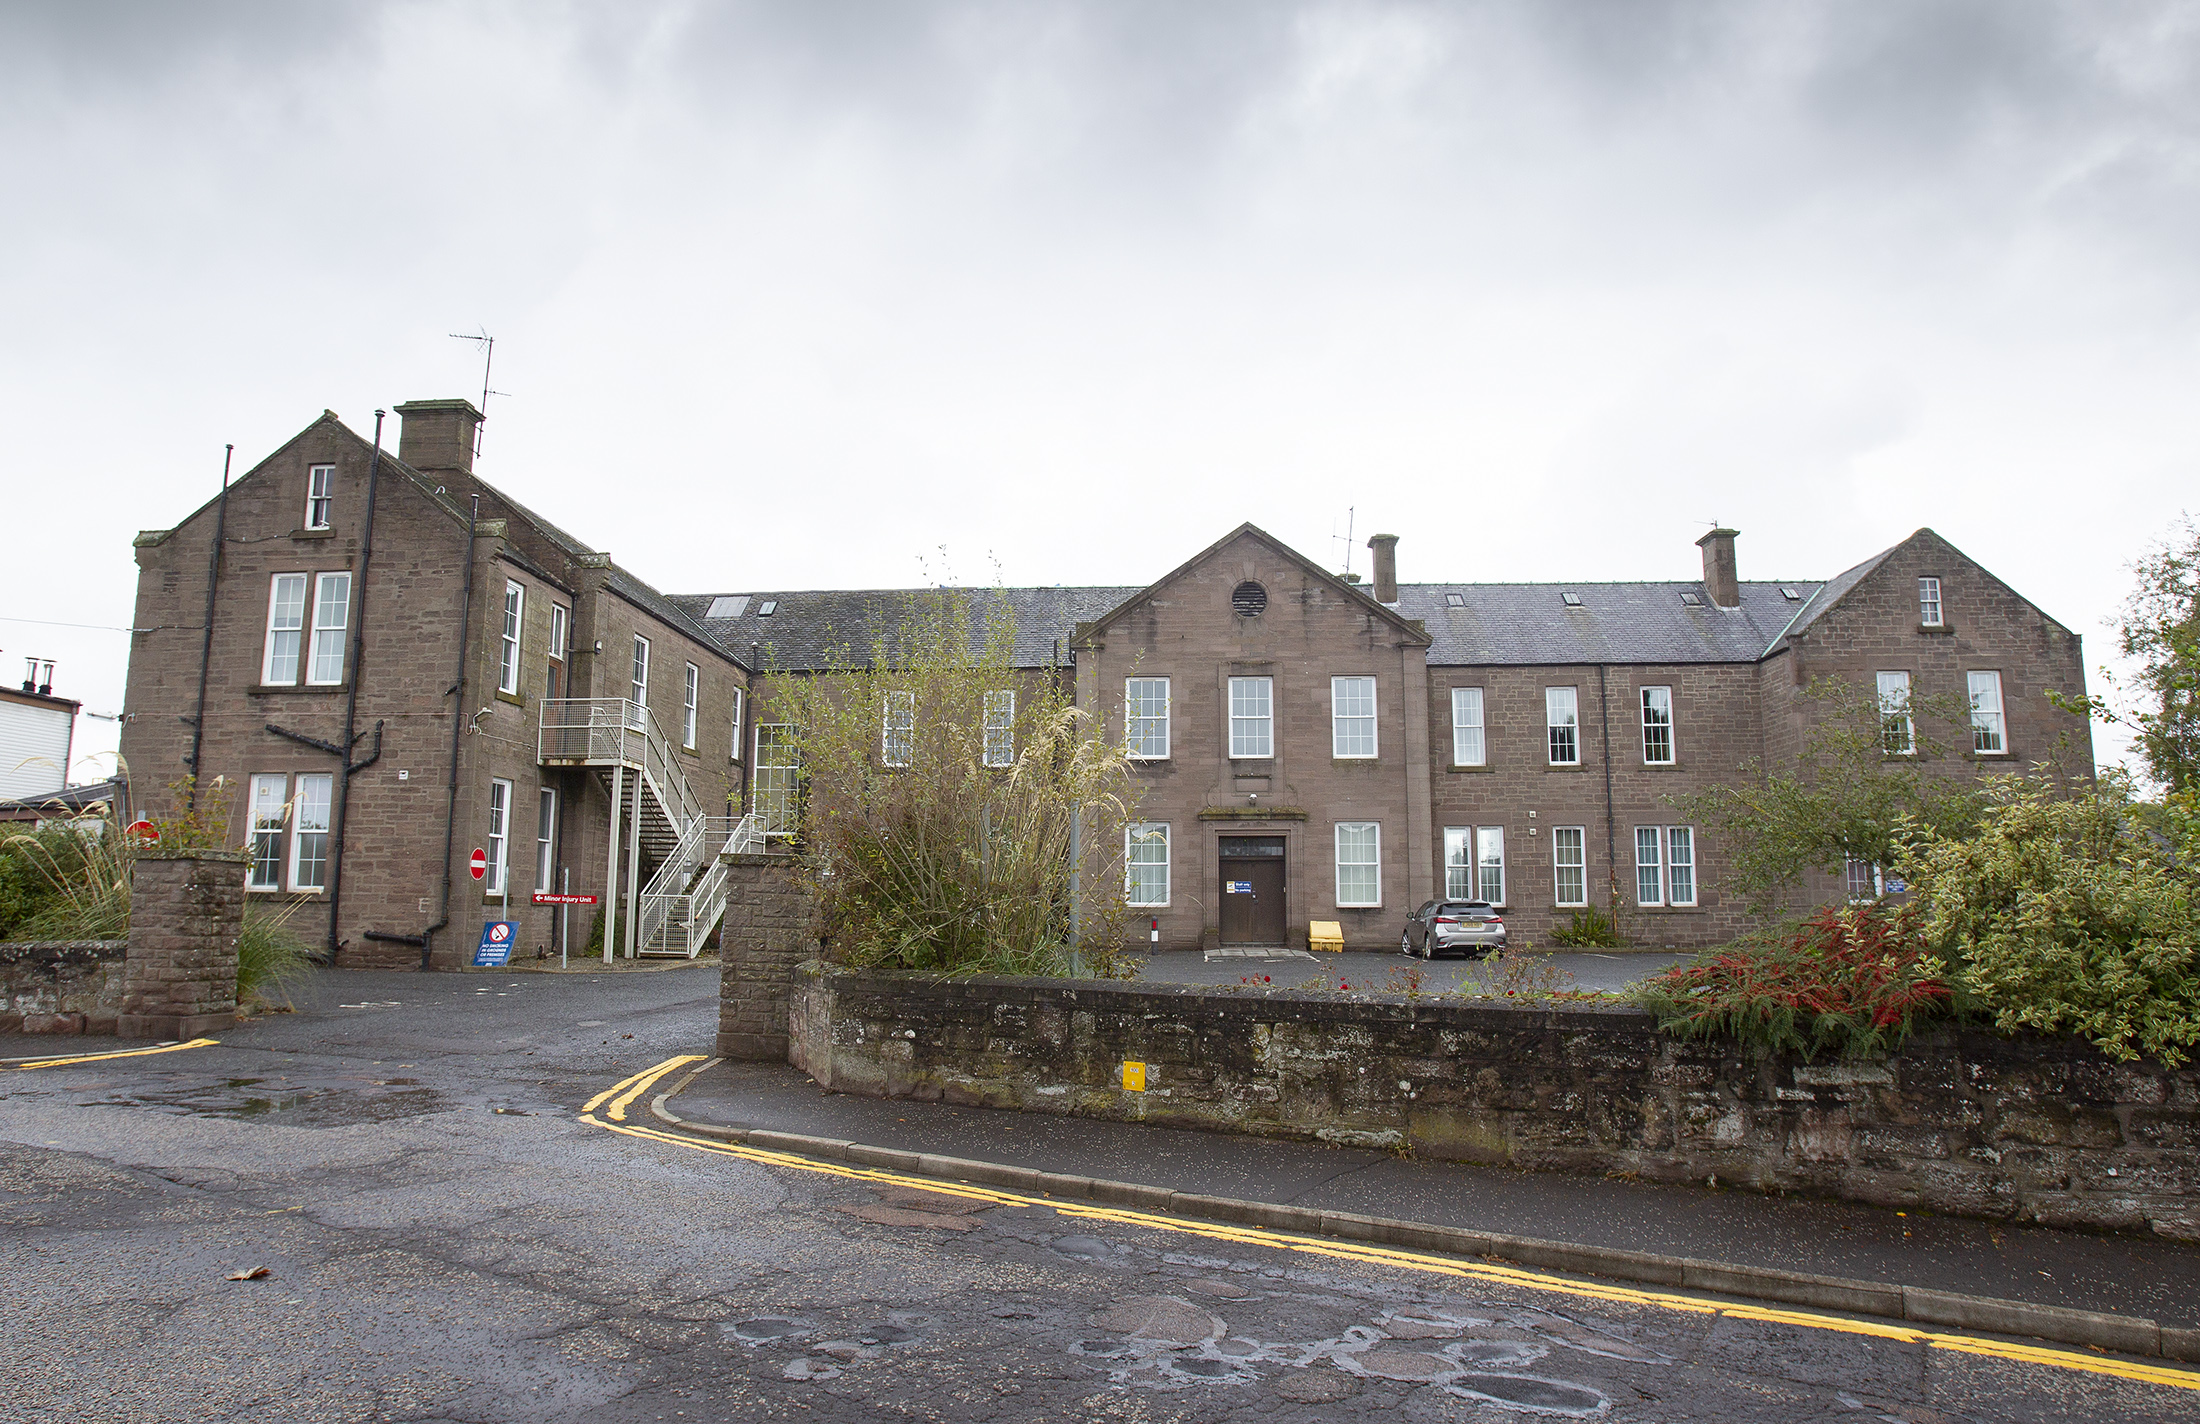 Plans have been submitted to demolish Brechin Infirmary.